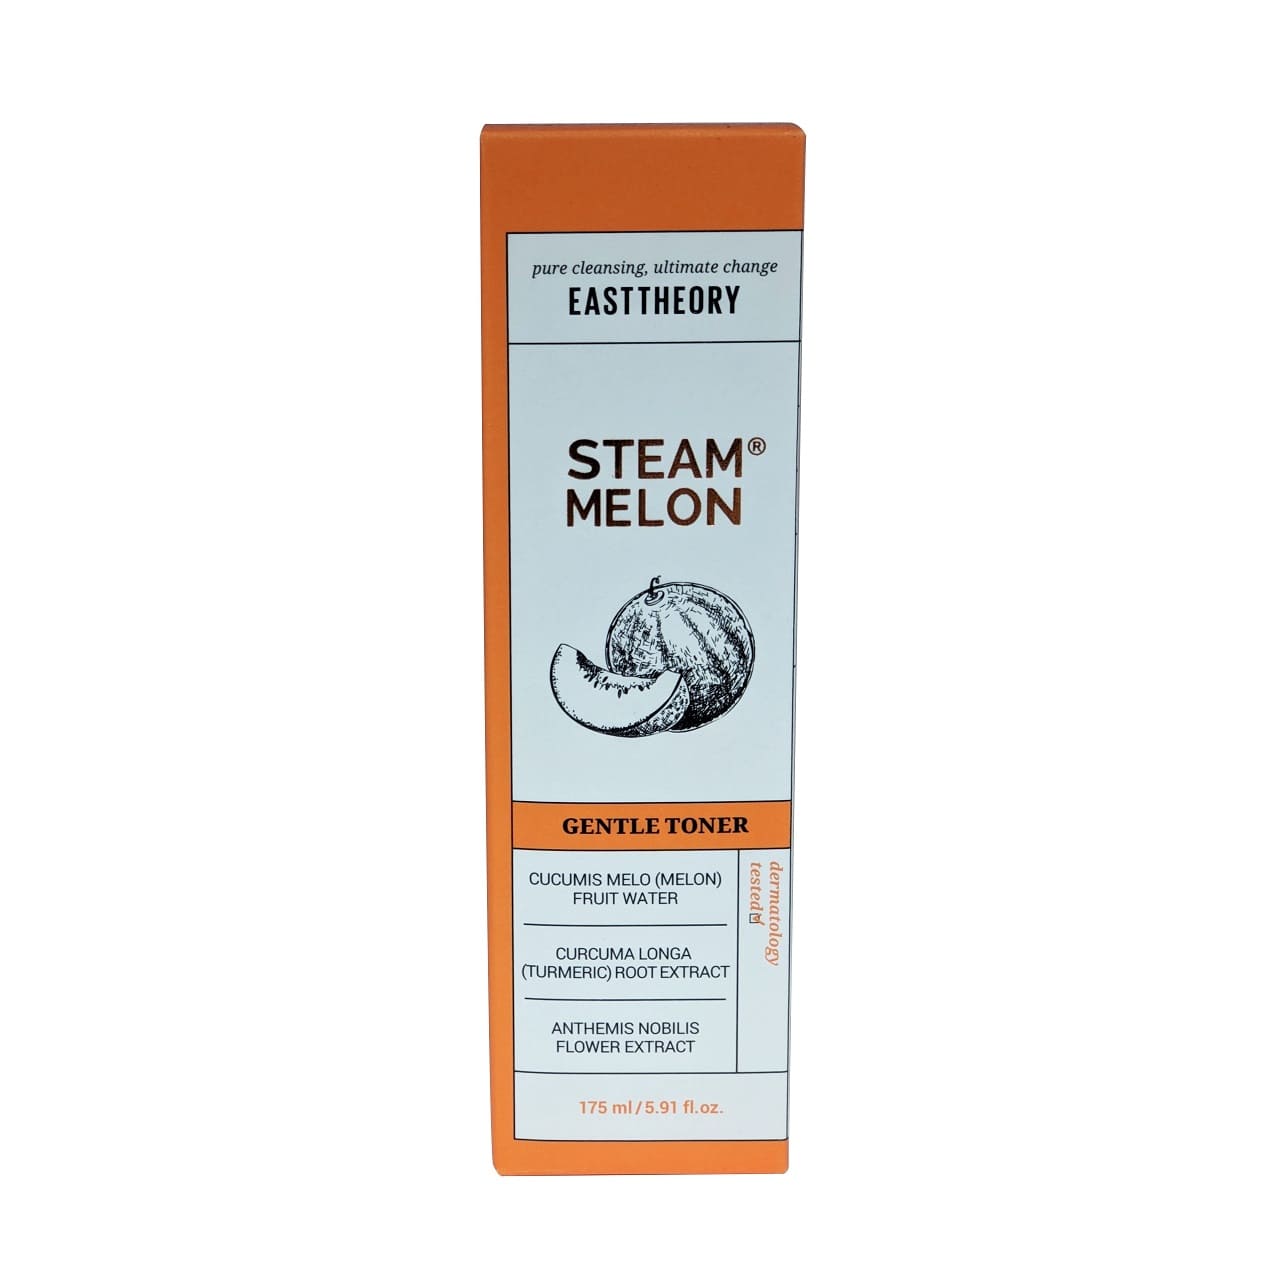 Product label for Easttheory Steam Melon Gentle Toner 